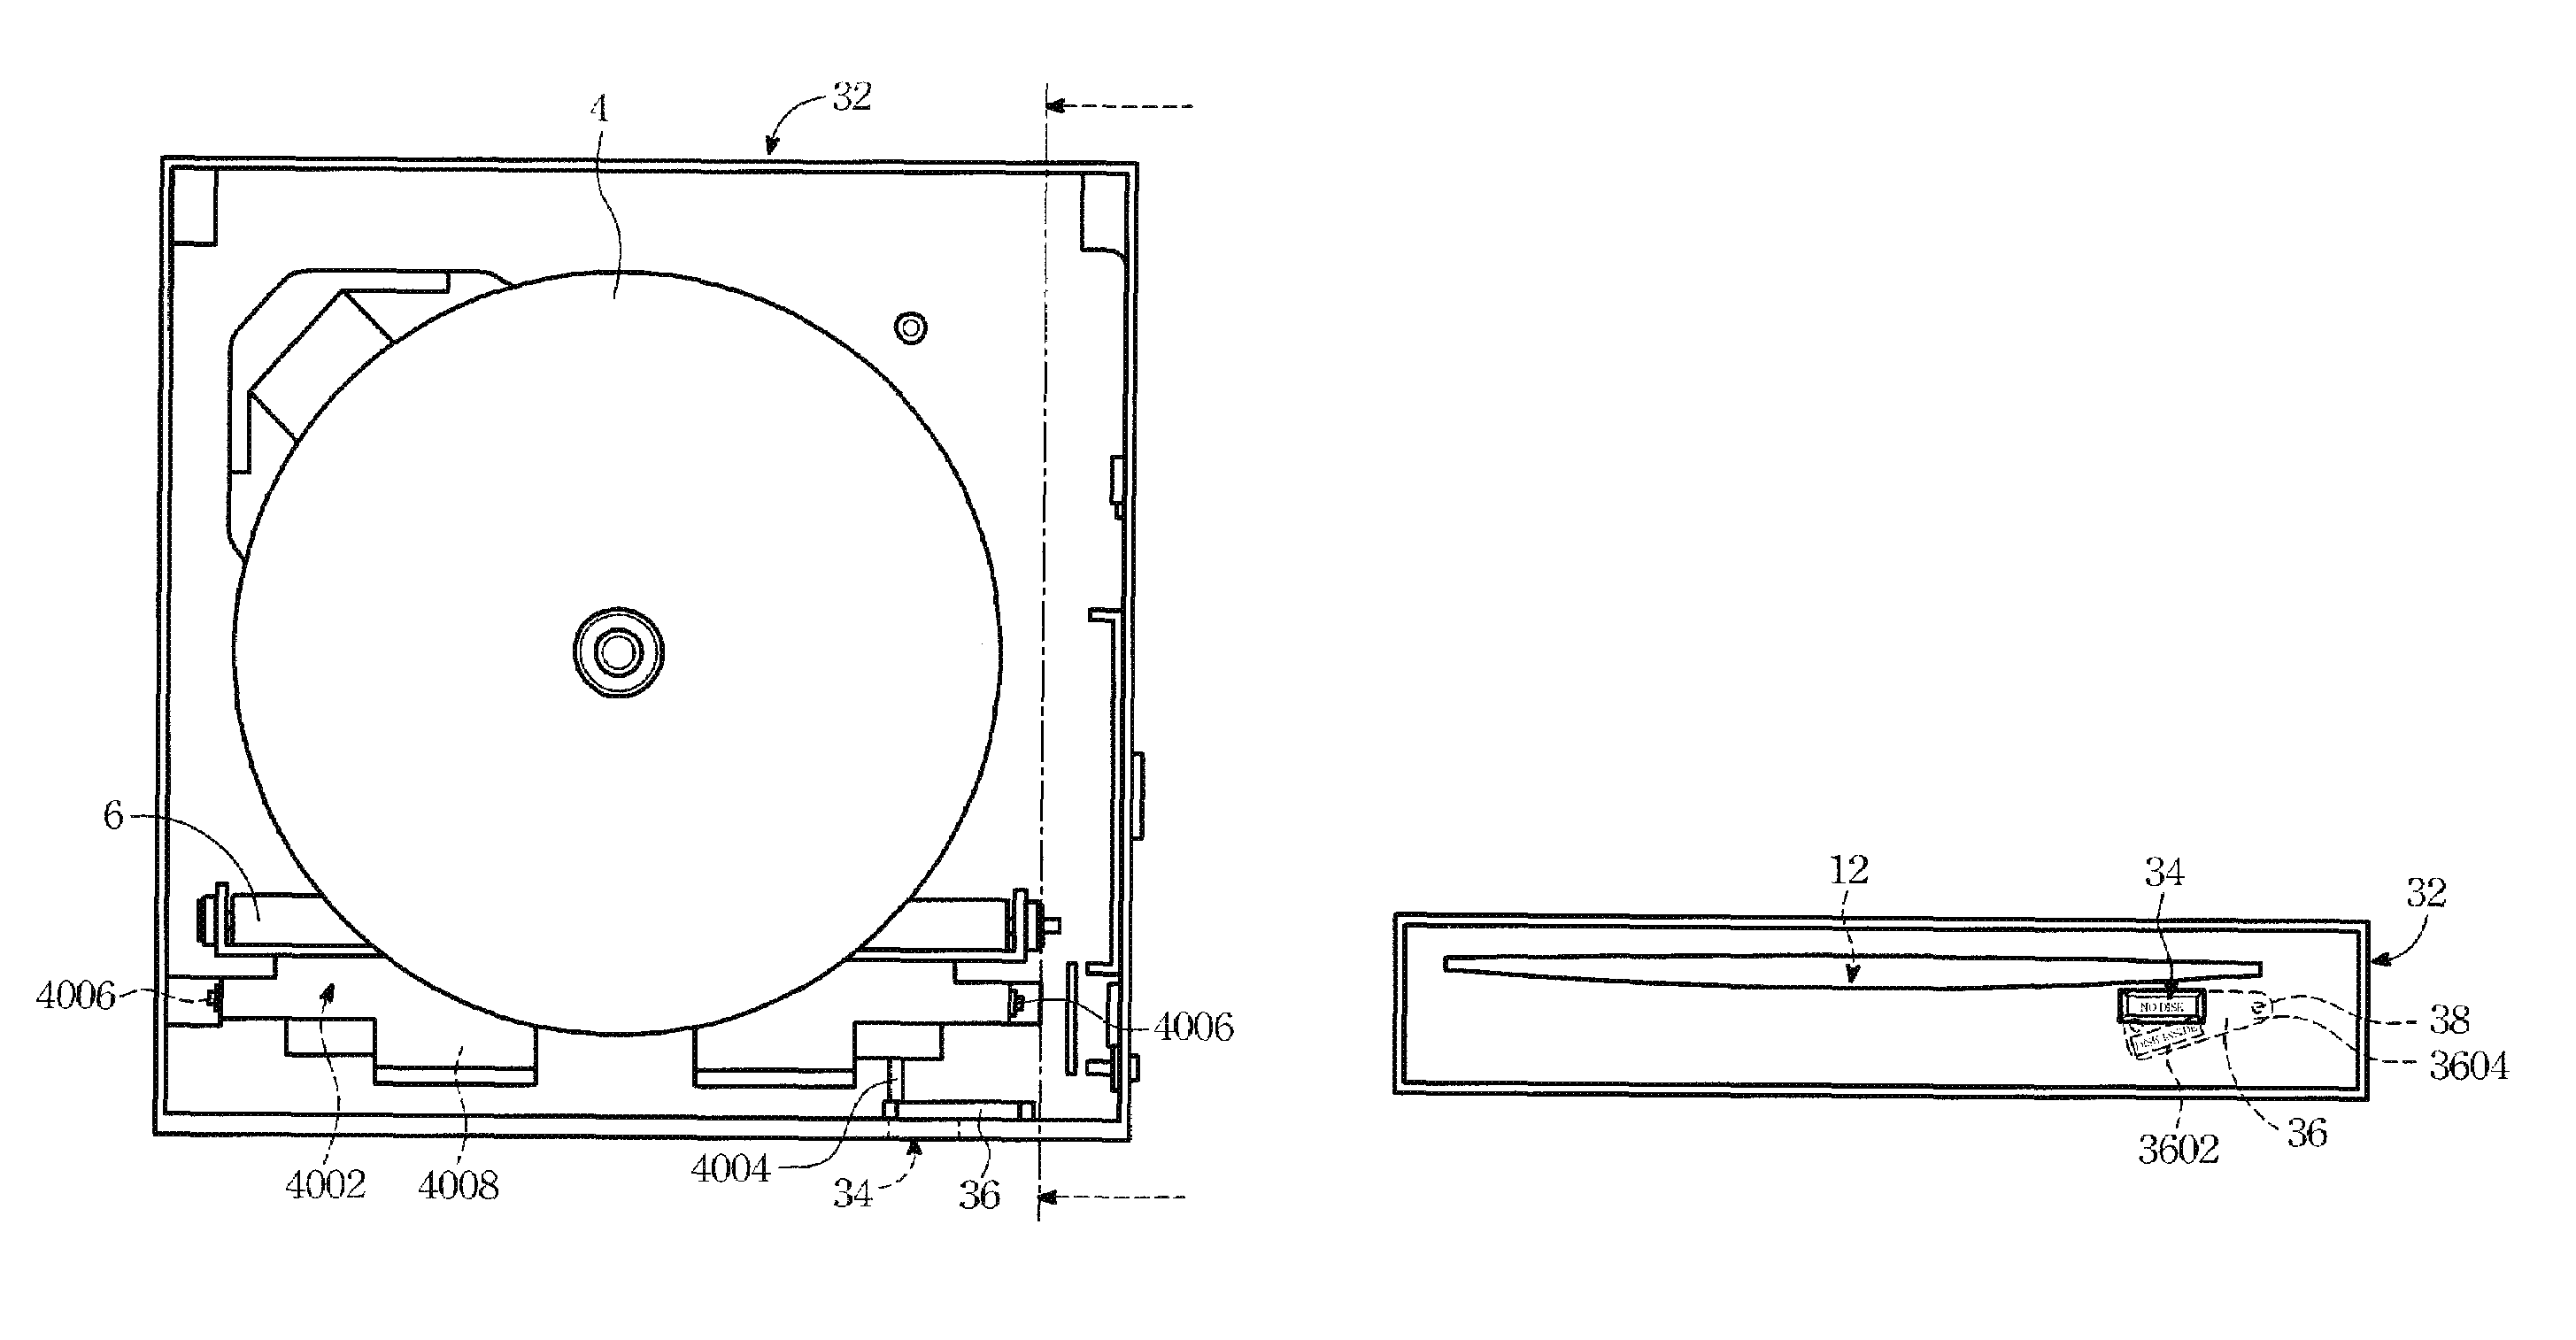 Slot-in optical reproducing apparatus with a visualized indicator